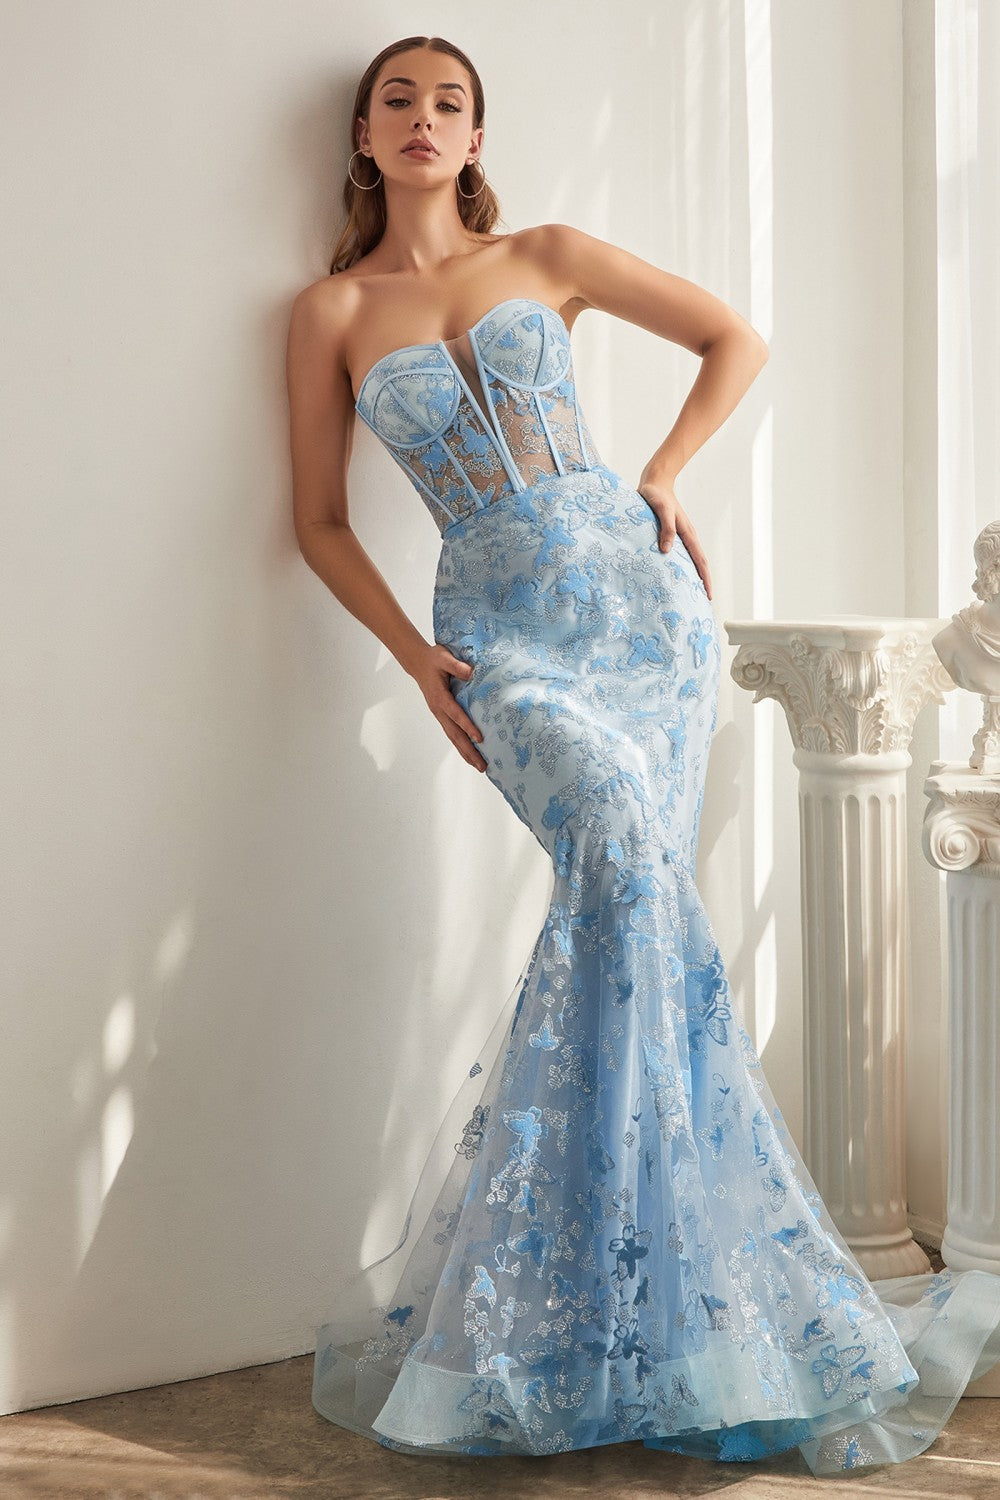 Blue Strapless Butterfly Mermaid Gown CB099 - Women Evening Formal Gown - Special Occasion